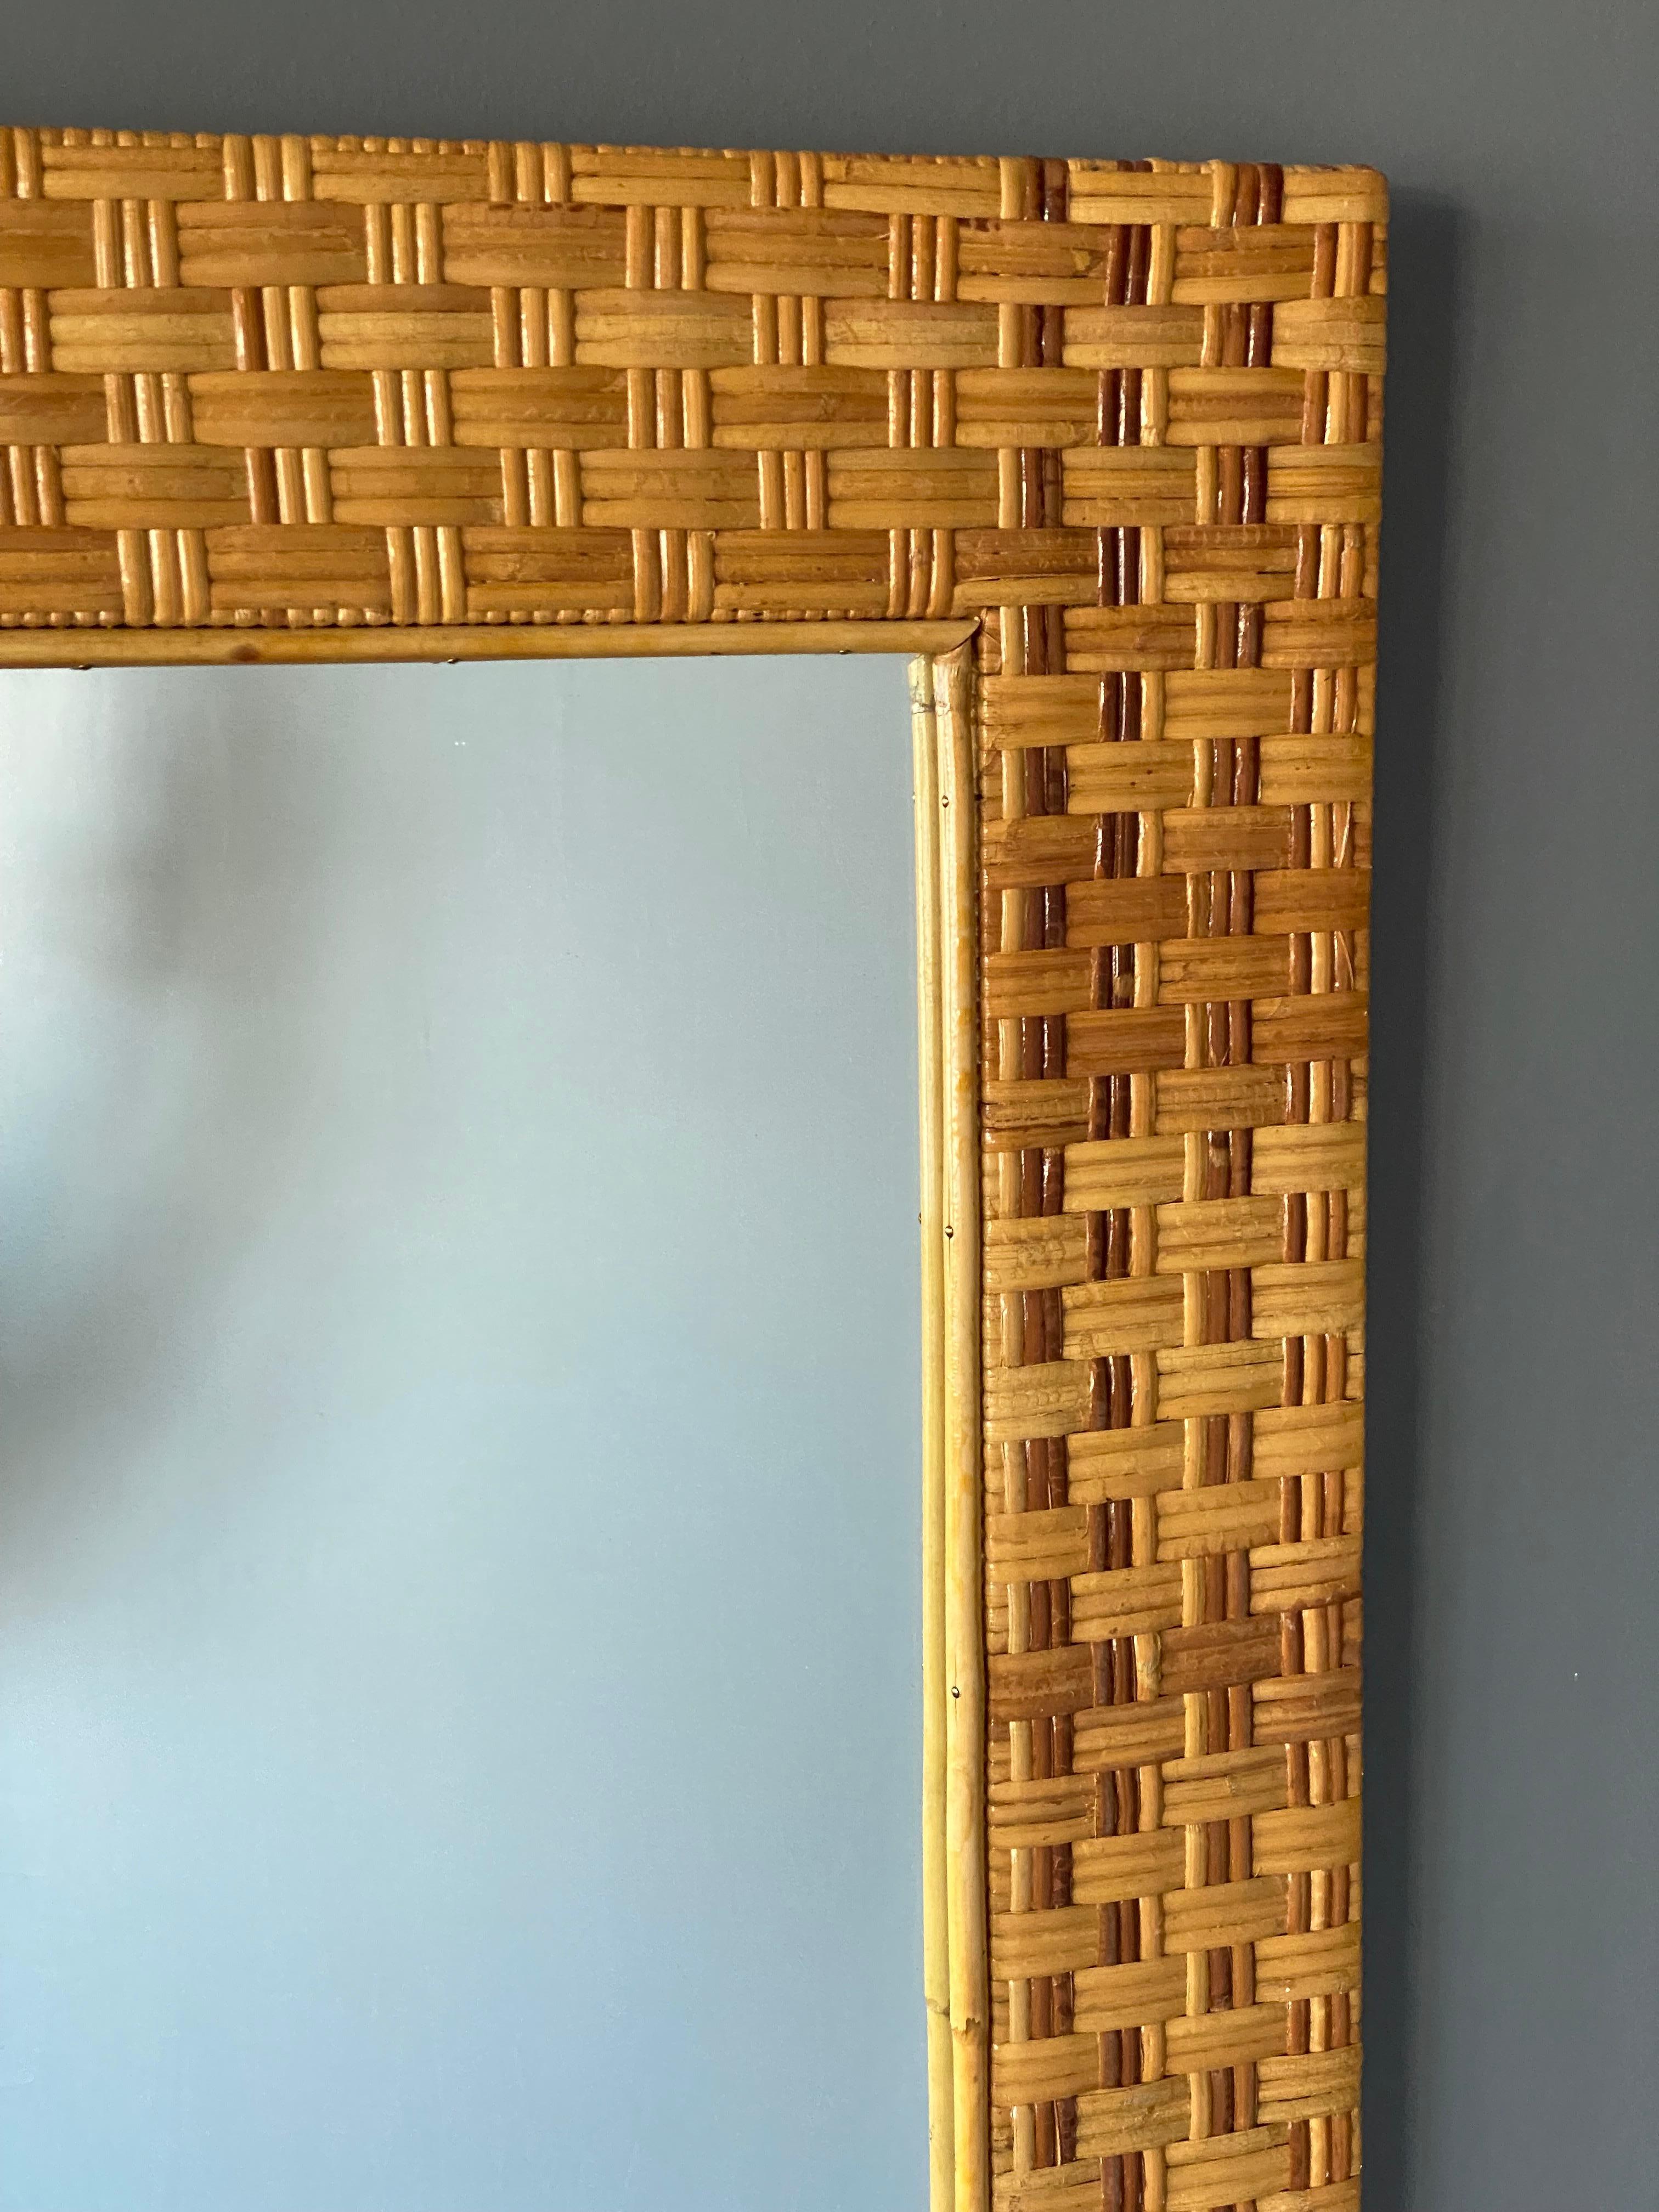 A wall mirror, produced in Italy, 1950s. Cut mirror glass is framed in bamboo and rattan.

